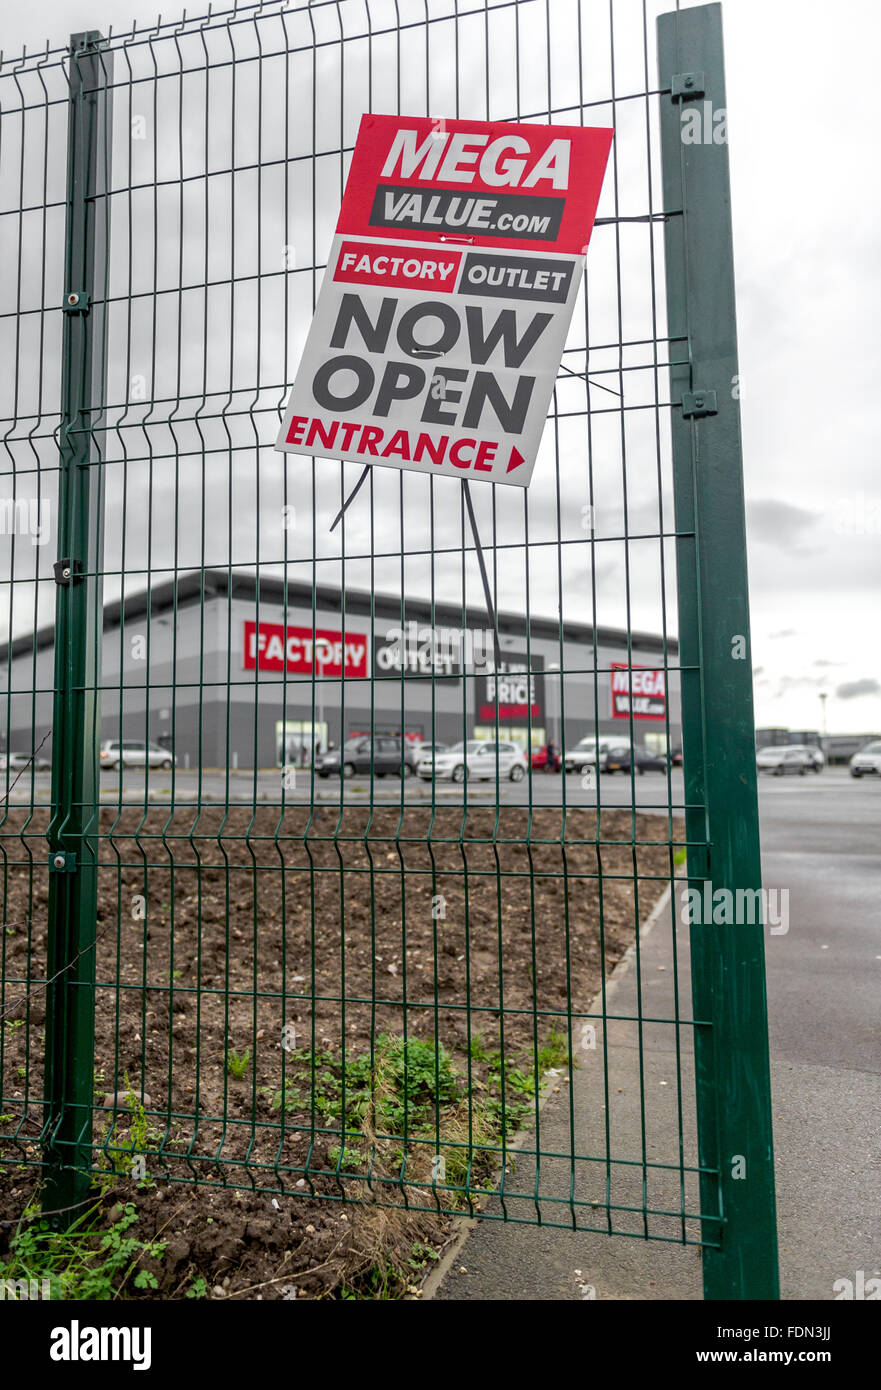 Mike Ashley's brand new business, Mega Value store now open for business at Shirebrook, Derbyshire. Stock Photo